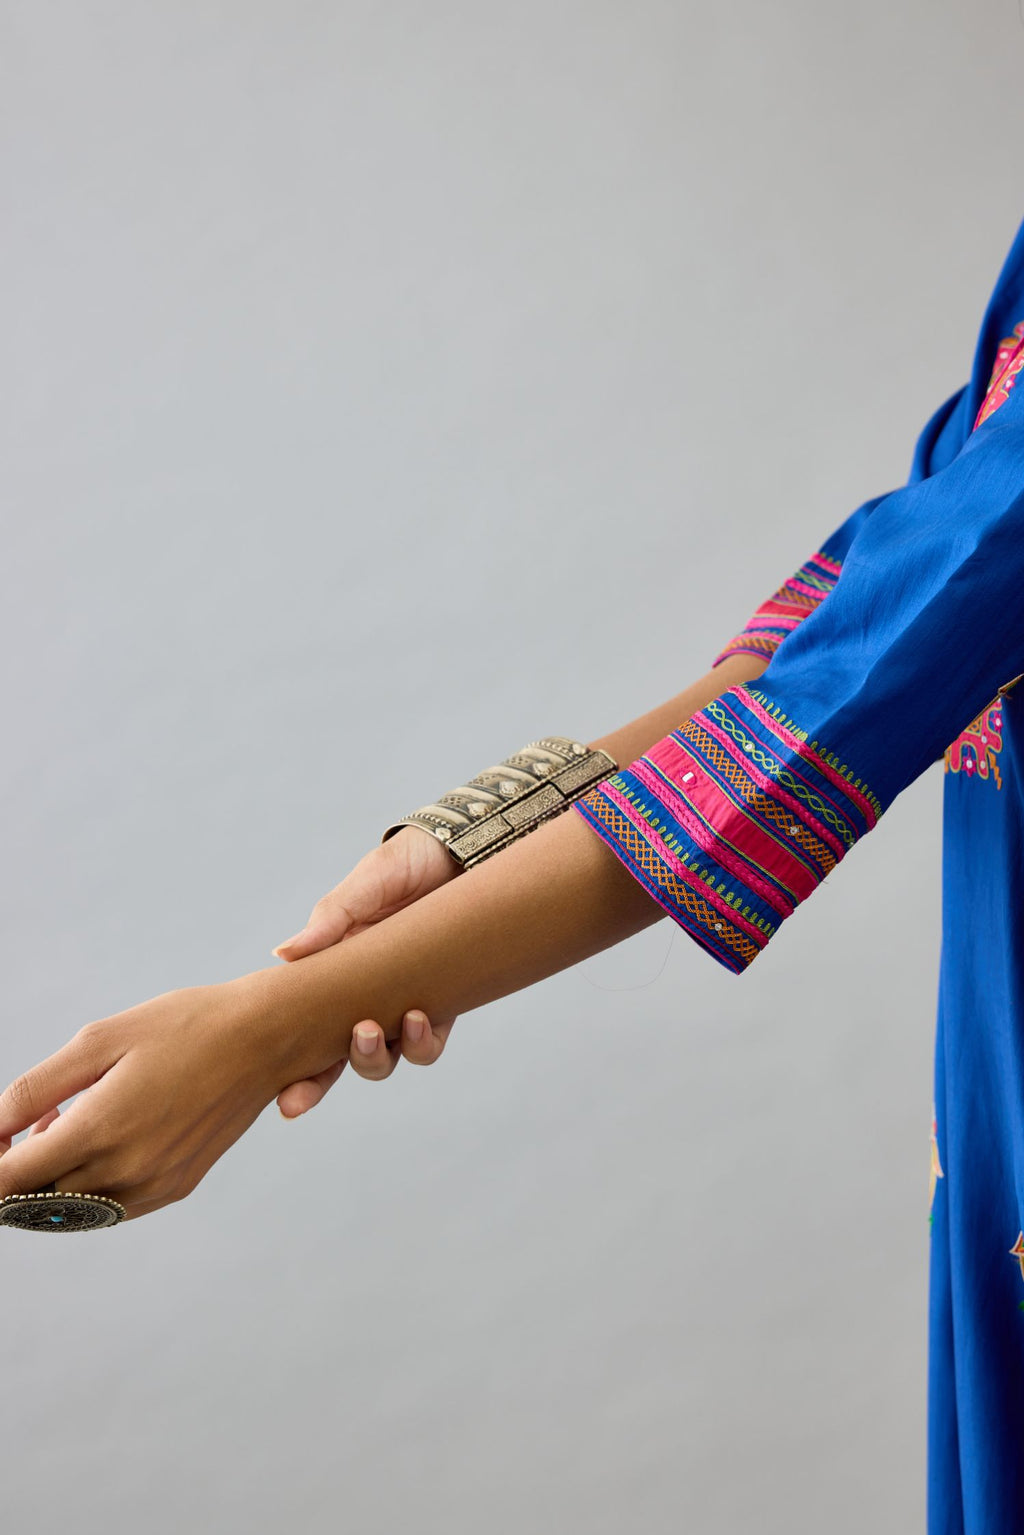 Blue silk straight kurta set with yoke and side panels. It has allover patchwork and silk thread embroidery, highlighted with mirror, sequins, tassels and braids.